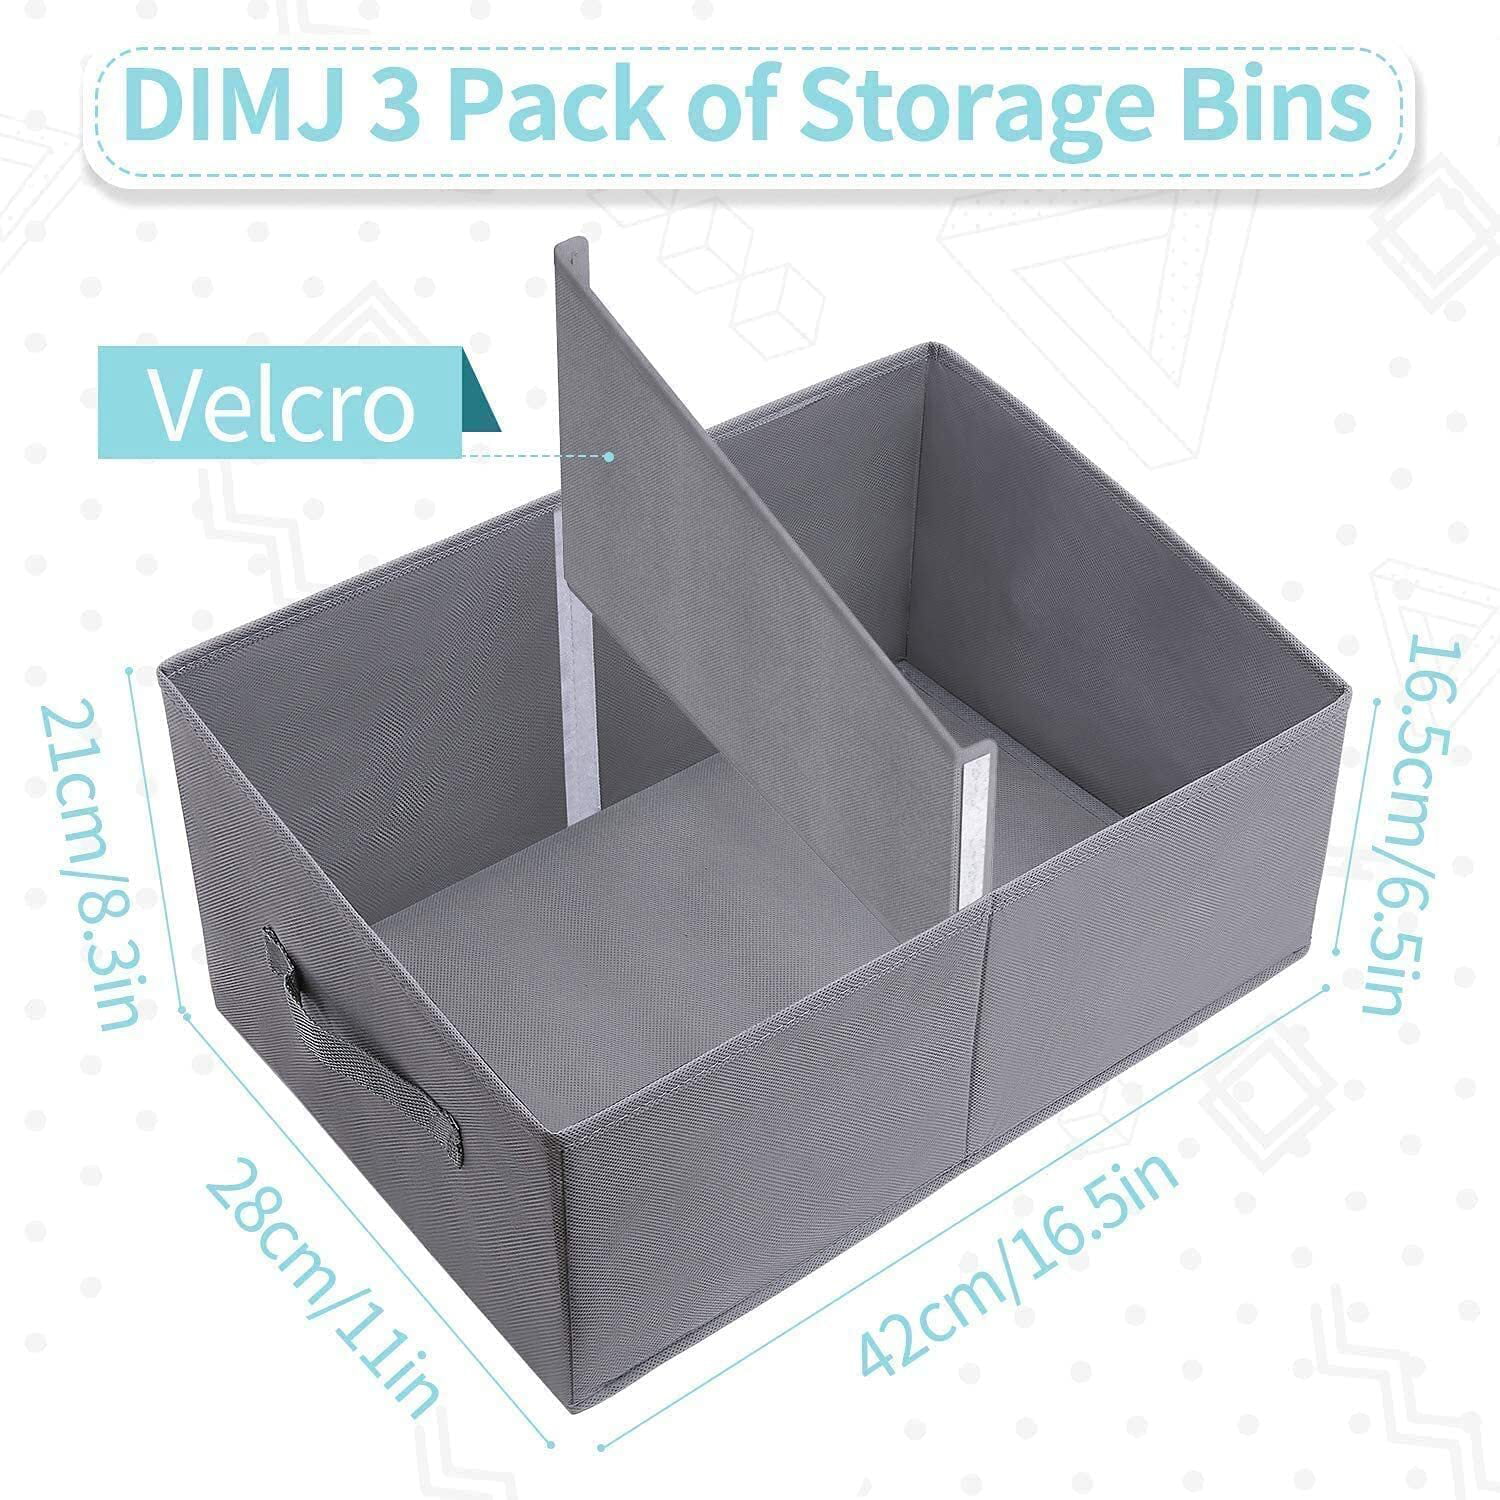 DIMJ Closet Bins, Trapezoid Storage Basket for Shelves, Fabric Storage Bins  with Handle and Divider, Foldable Closet Organizer Bins for Clothes,  Towels, Toys, DVD, Books, 6 Packs